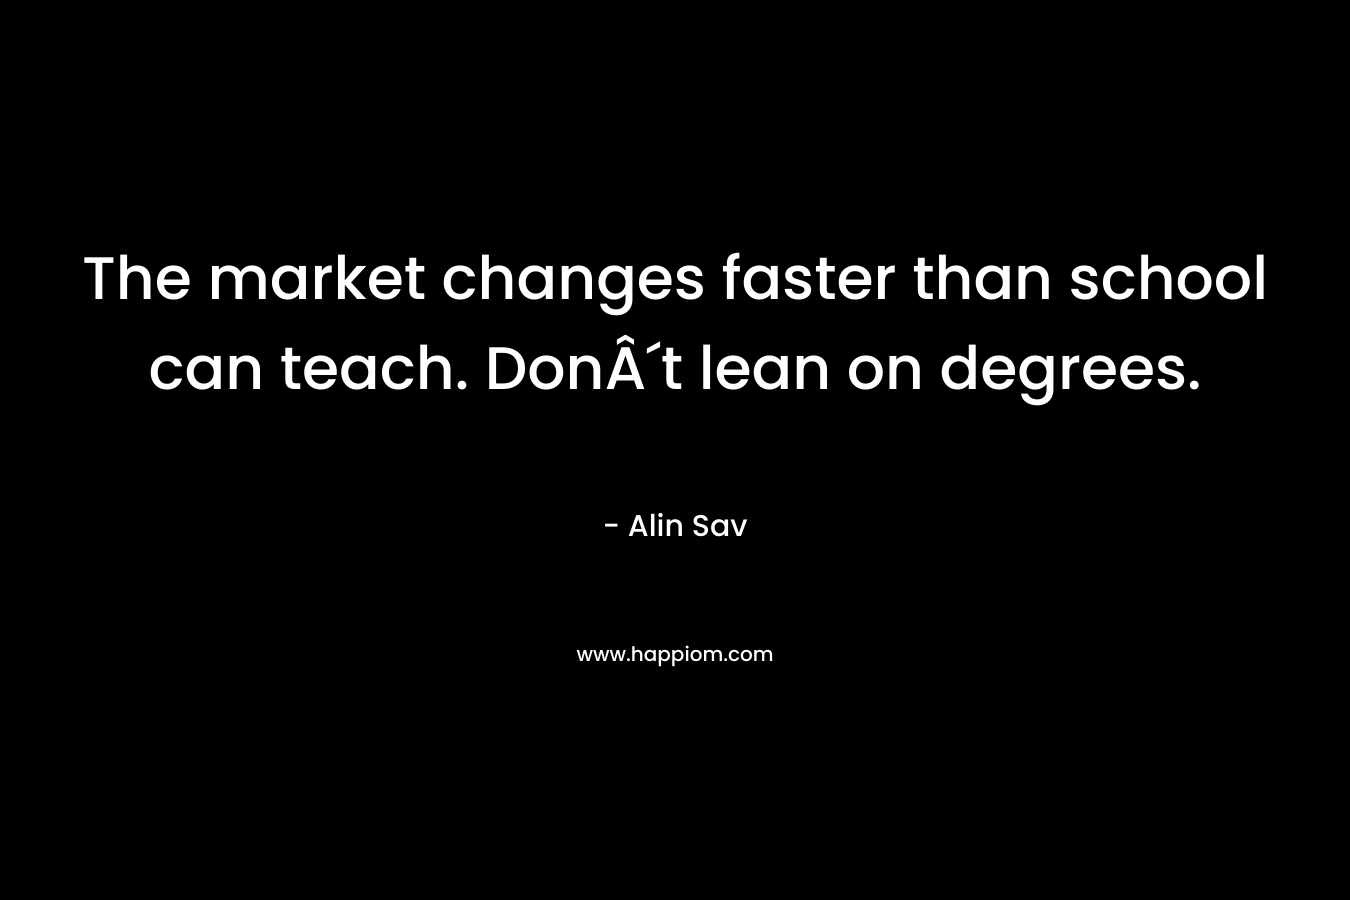 The market changes faster than school can teach. DonÂ´t lean on degrees.